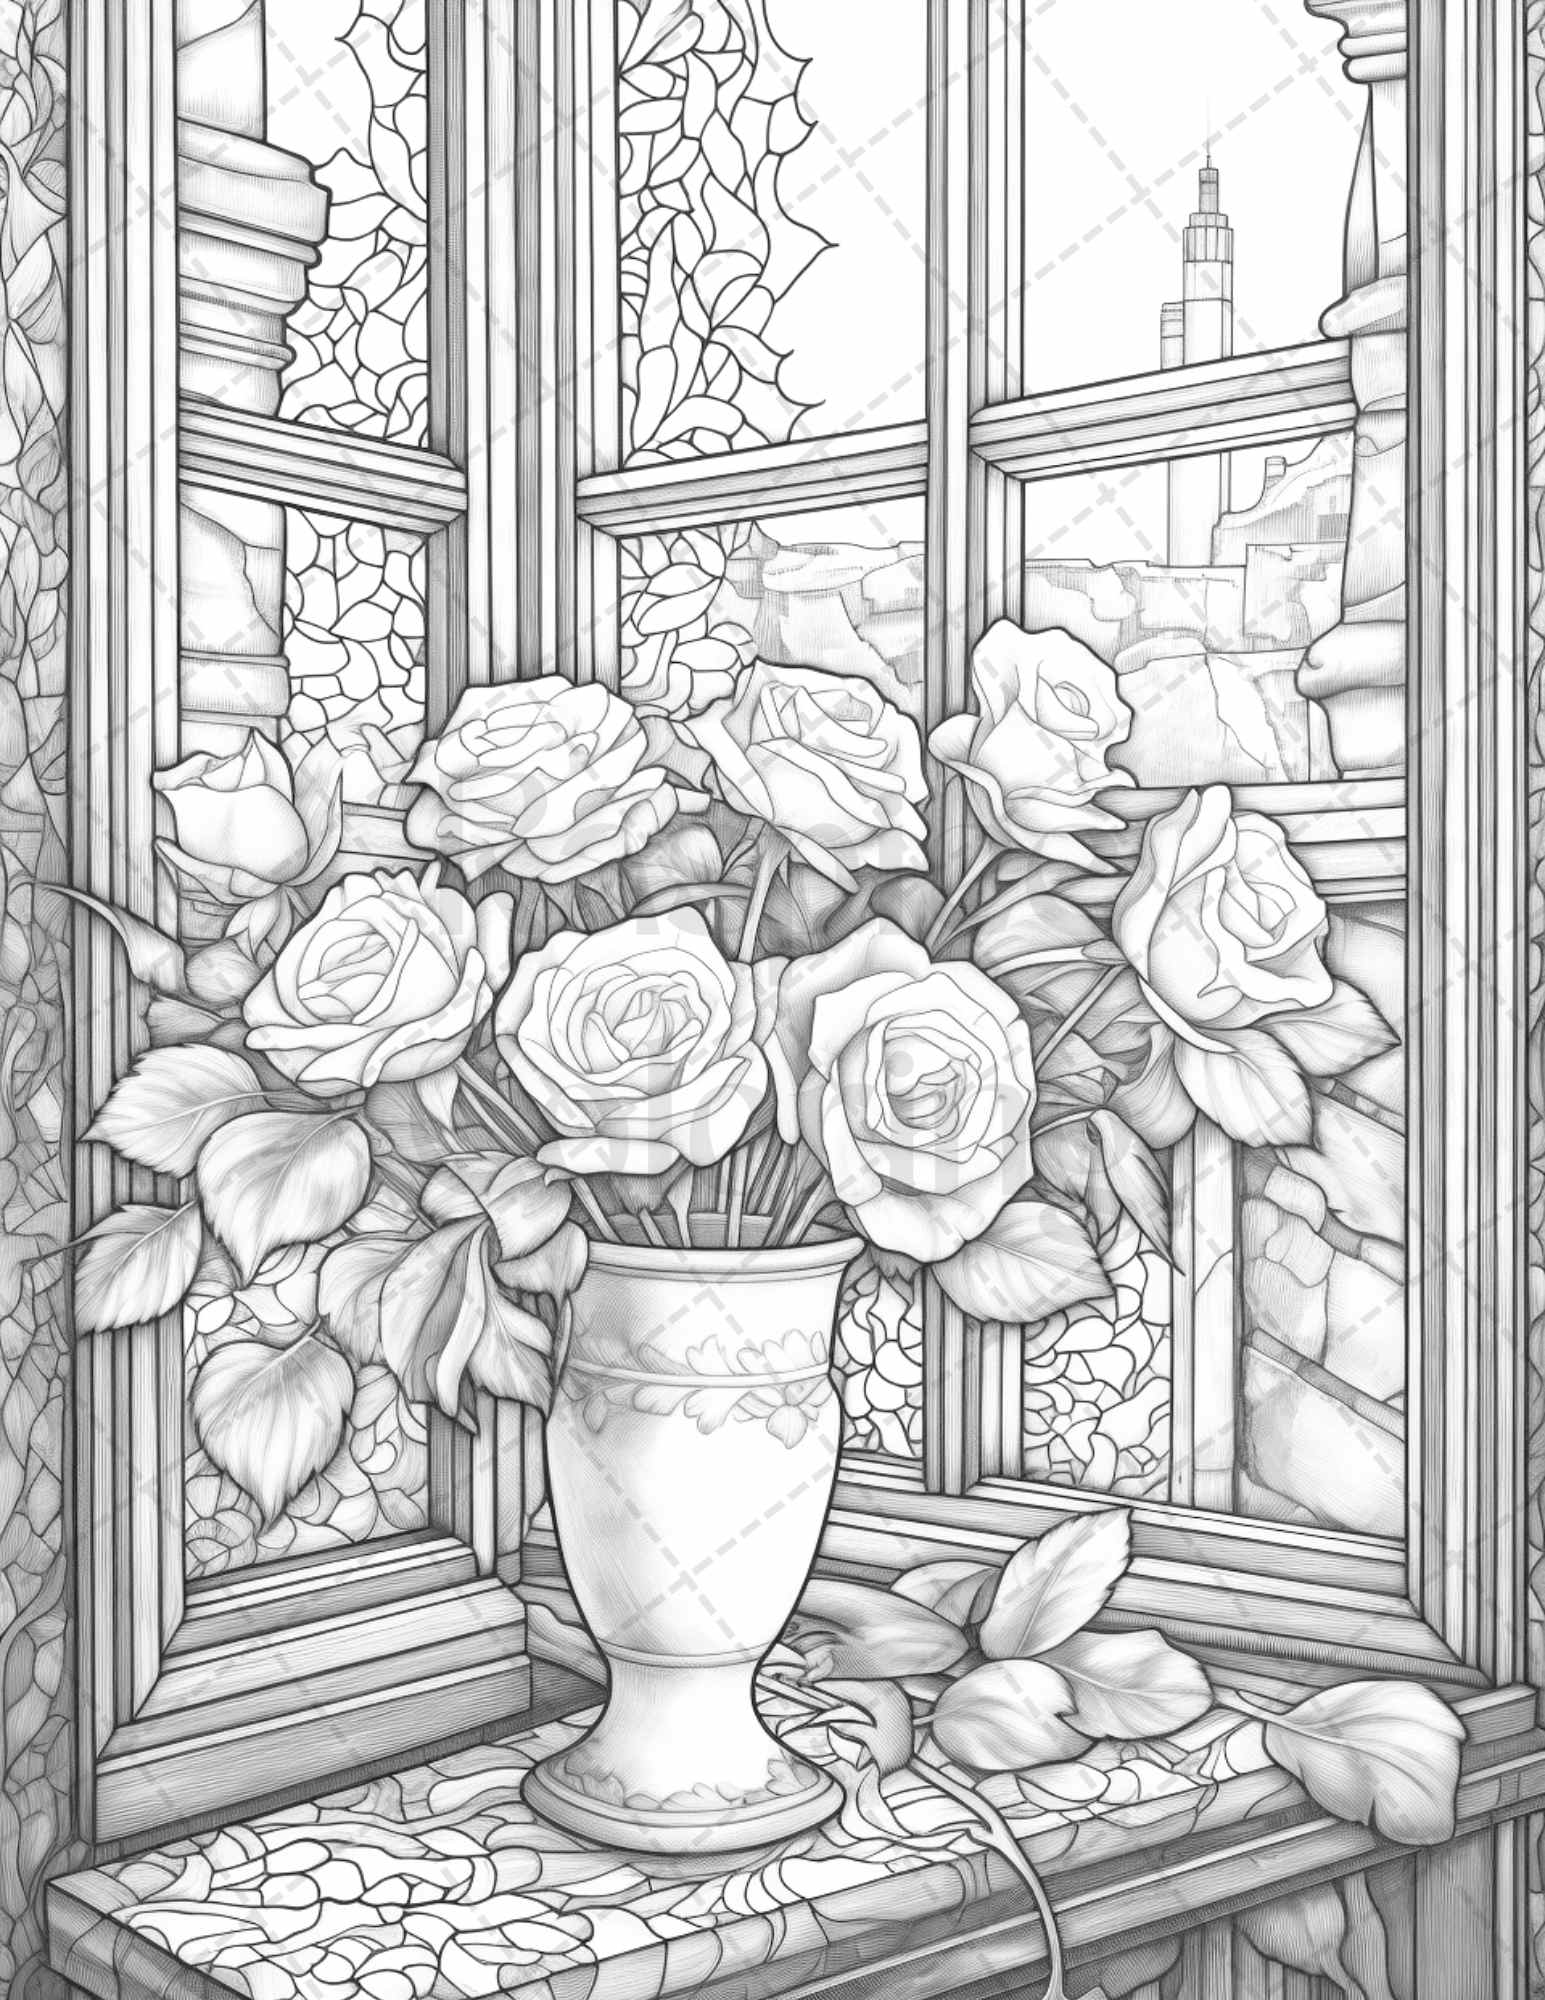 40 Captivating Roses Grayscale Coloring Pages Printable for Adults, PDF File Instant Download - raspiee